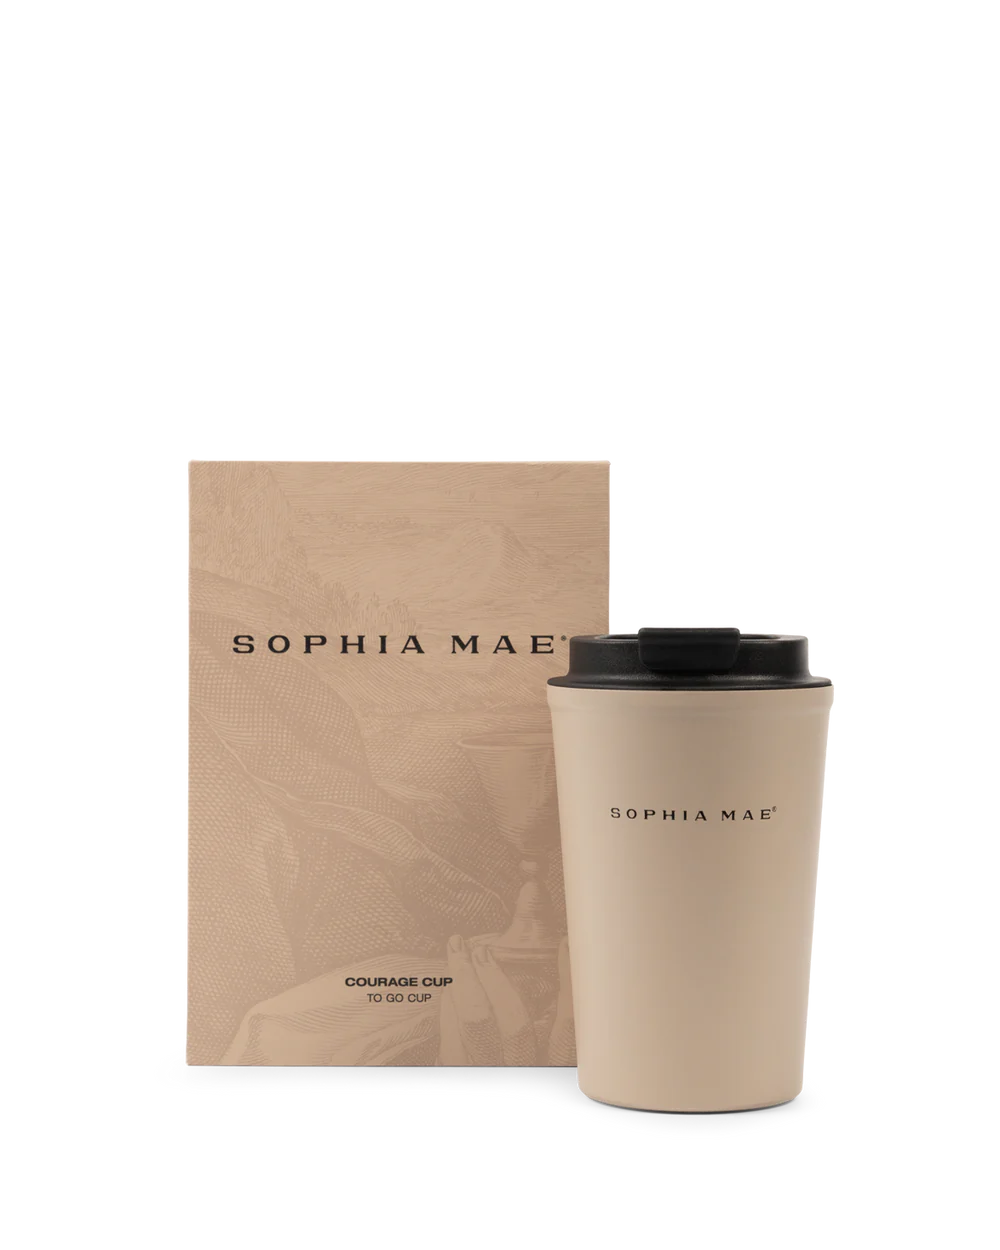 Sophia Mae Courage cup